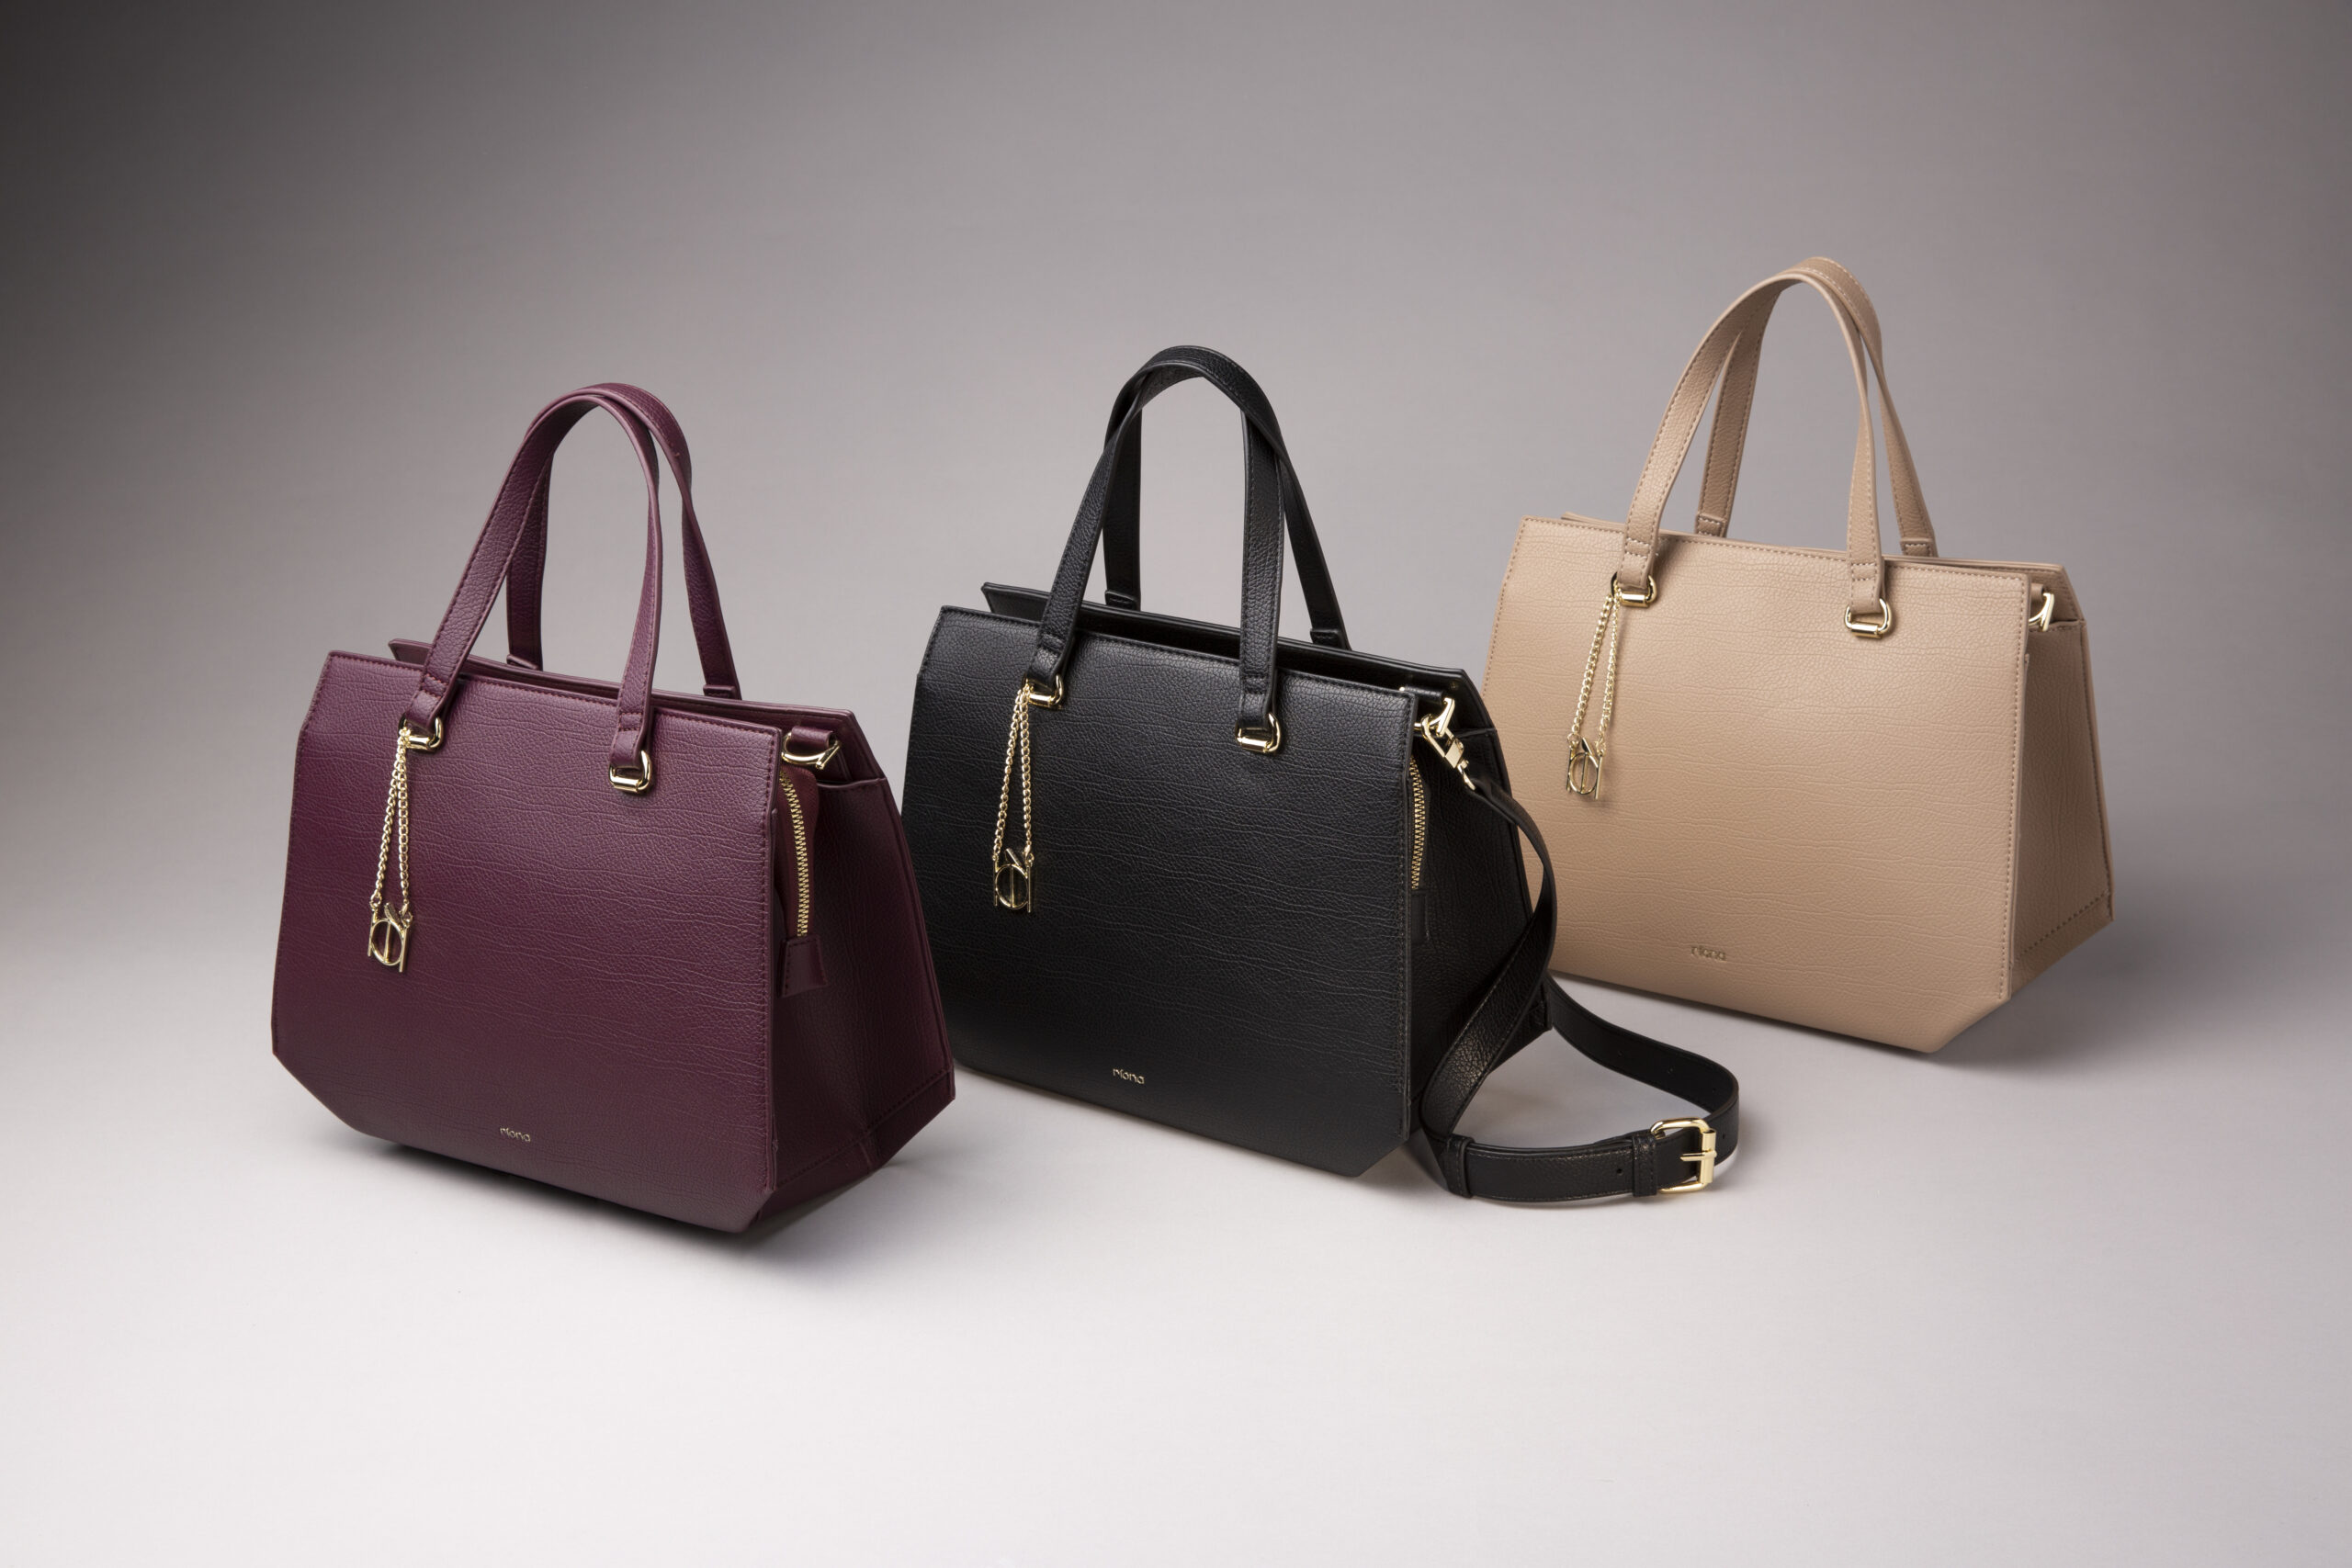 Riona Soho Satchel Collection scaled